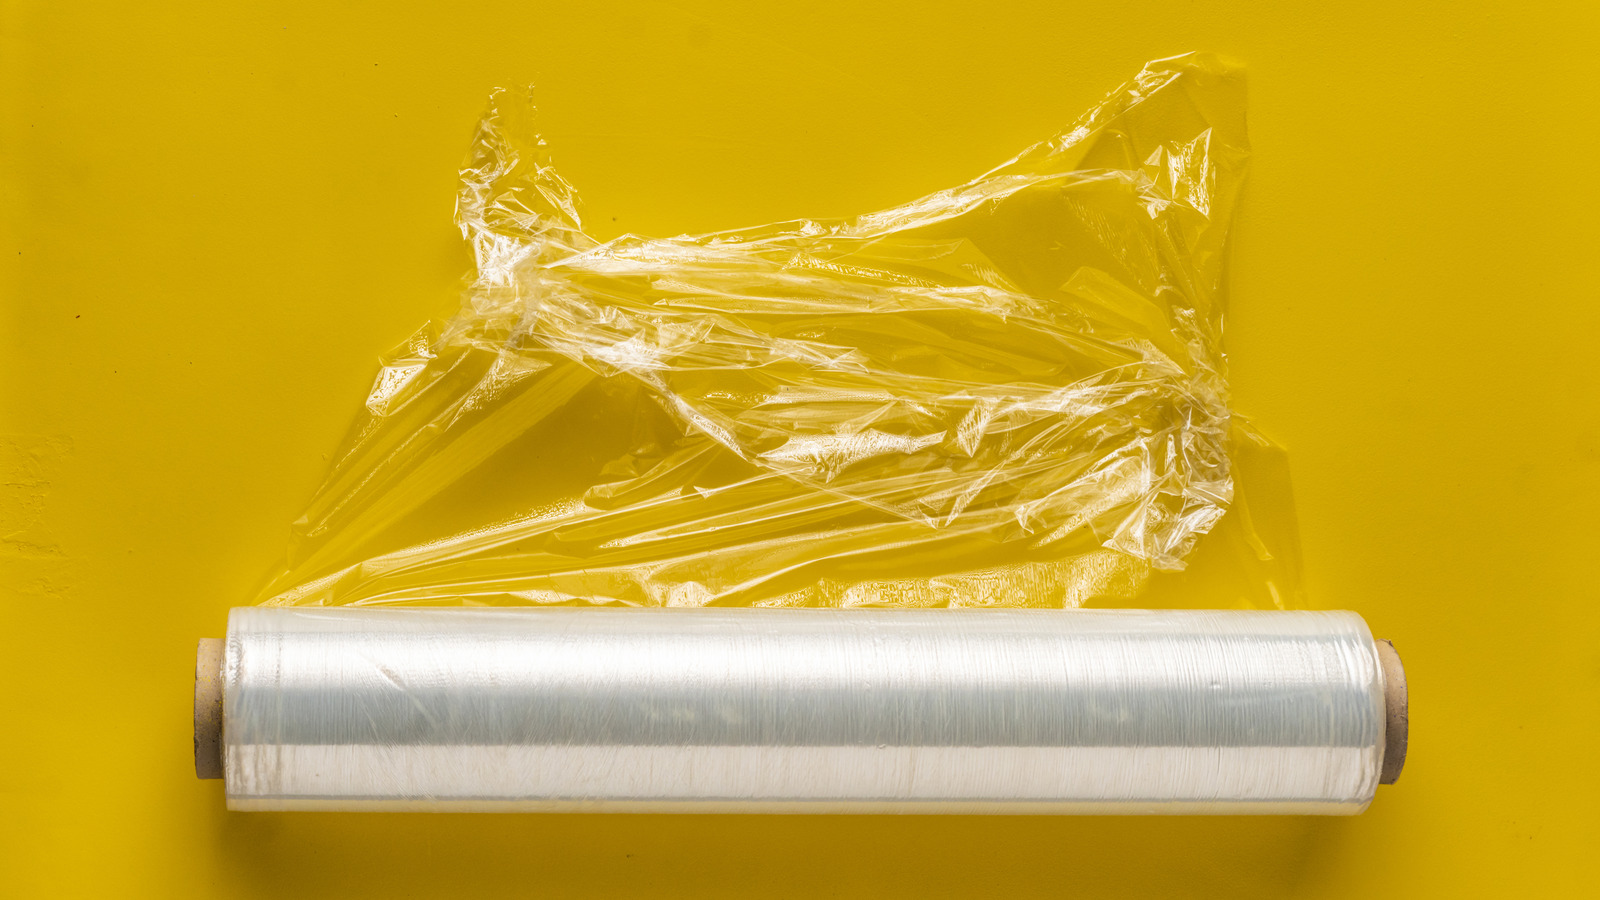 10 Foods You Shouldn't Be Wrapping In Plastic Wrap